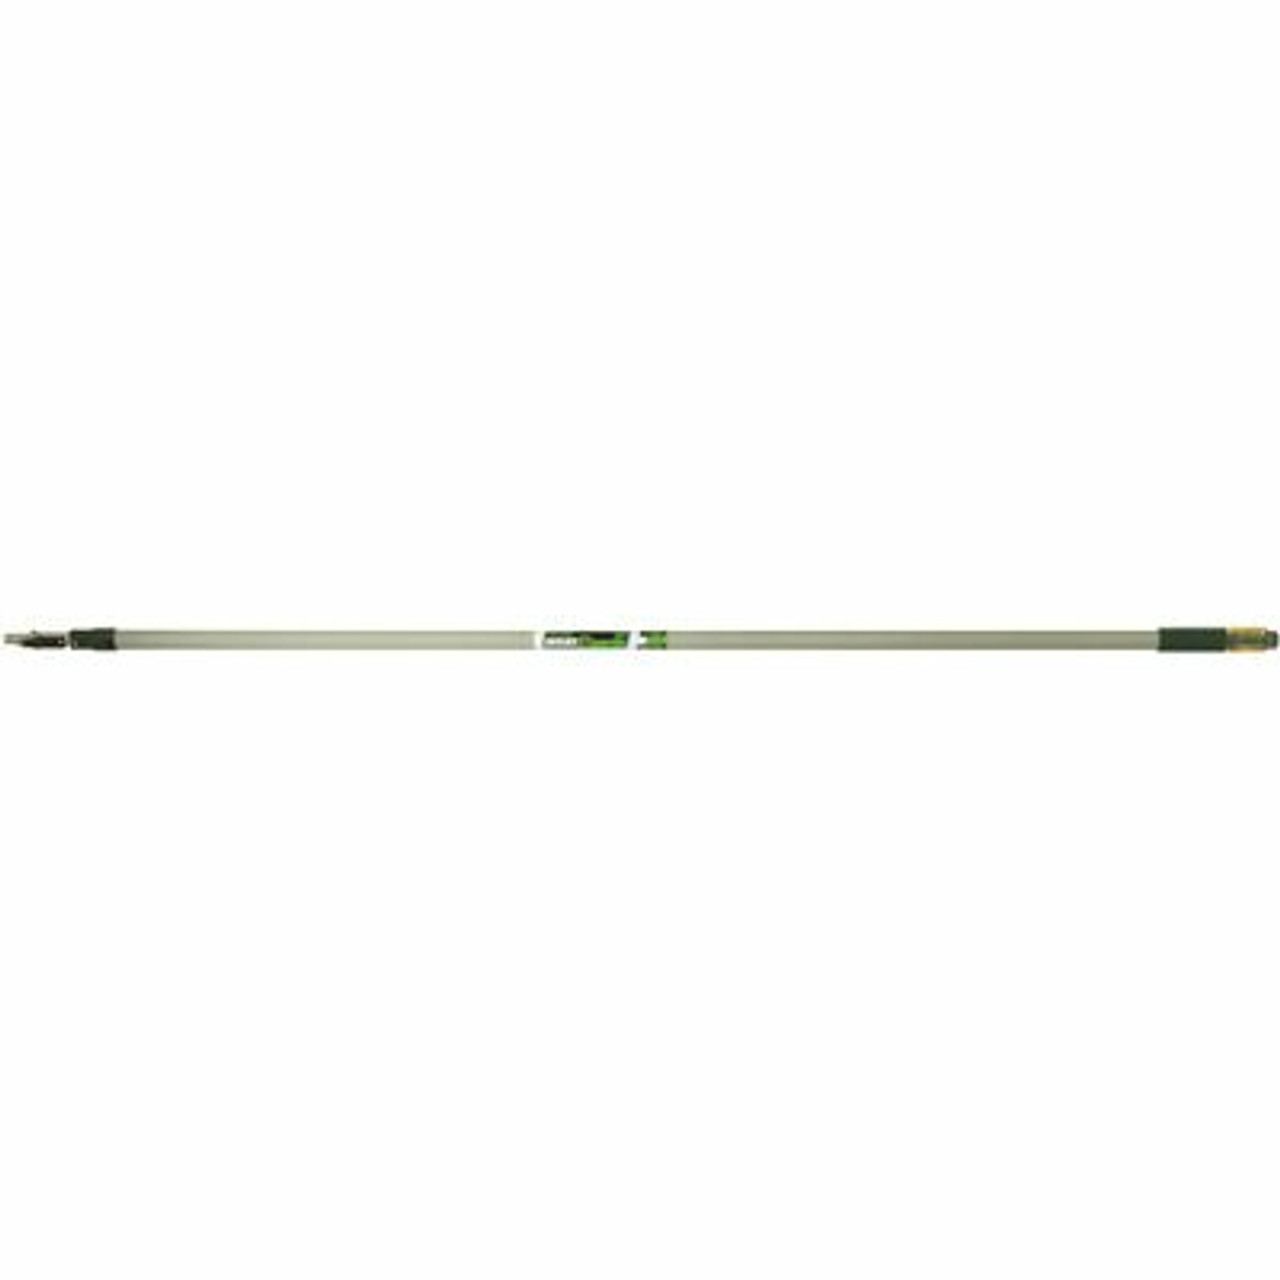 Wooster Sherlock Gt Convertible 8 Ft. To 16 Ft. Adjustable Extension Pole